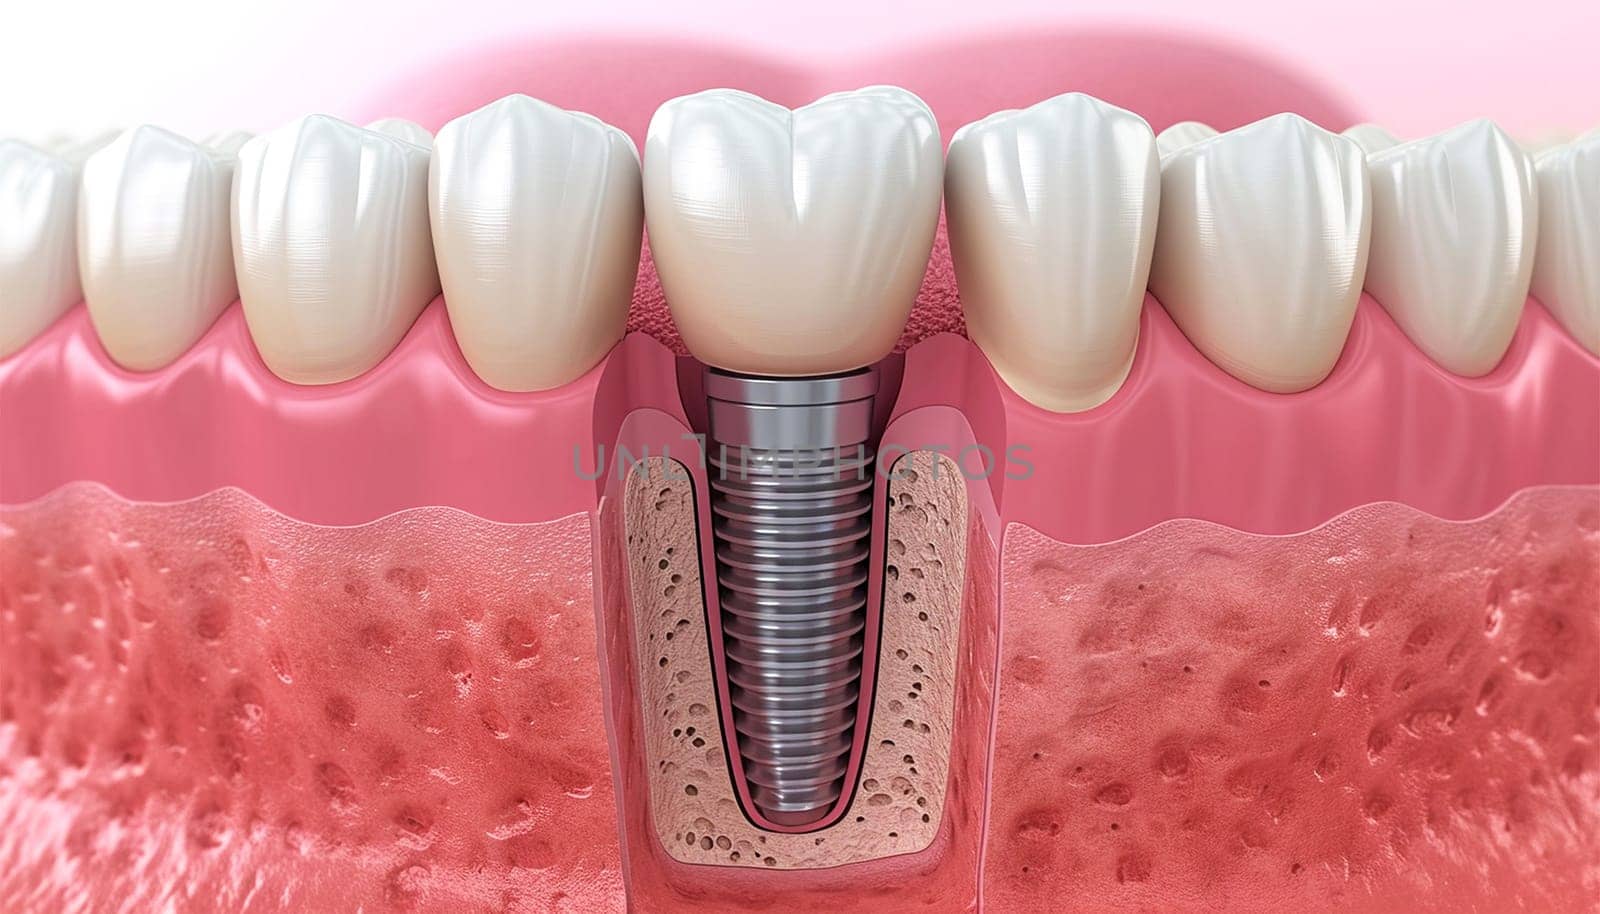 Closeup white tooth and gum with Dental implant , Human Teeth for Medical Concept, 3d illustration. Dental teeth implant healthy teeth and tooth human dentura by Annebel146